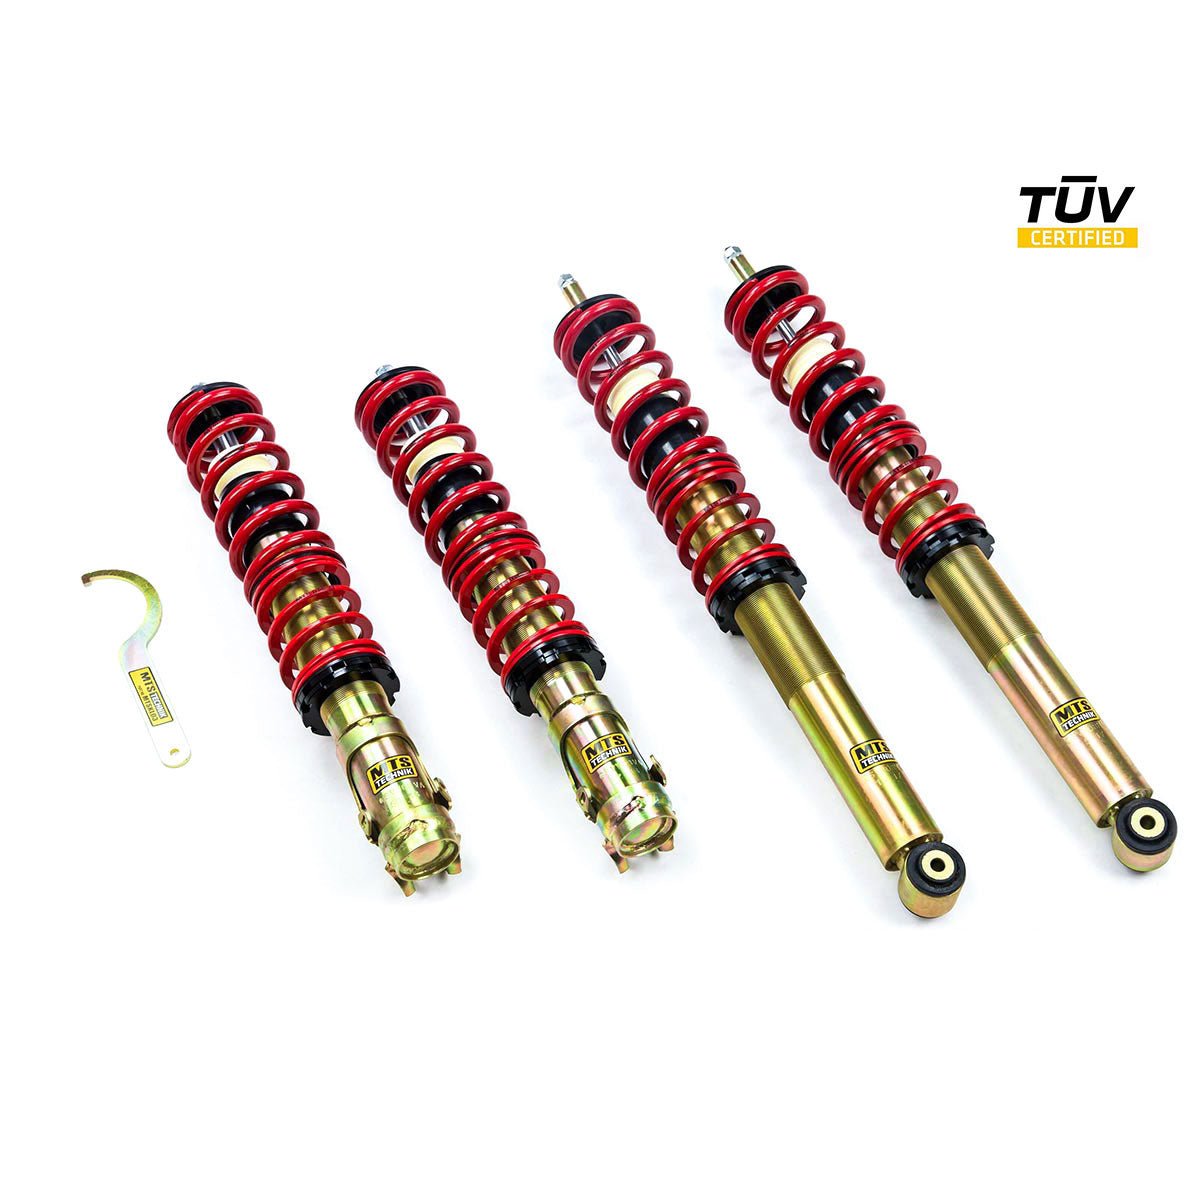 MTS TECHNIK coilover kit STREET VW Golf 3 (with TÜV) - PARTS33 GmbH